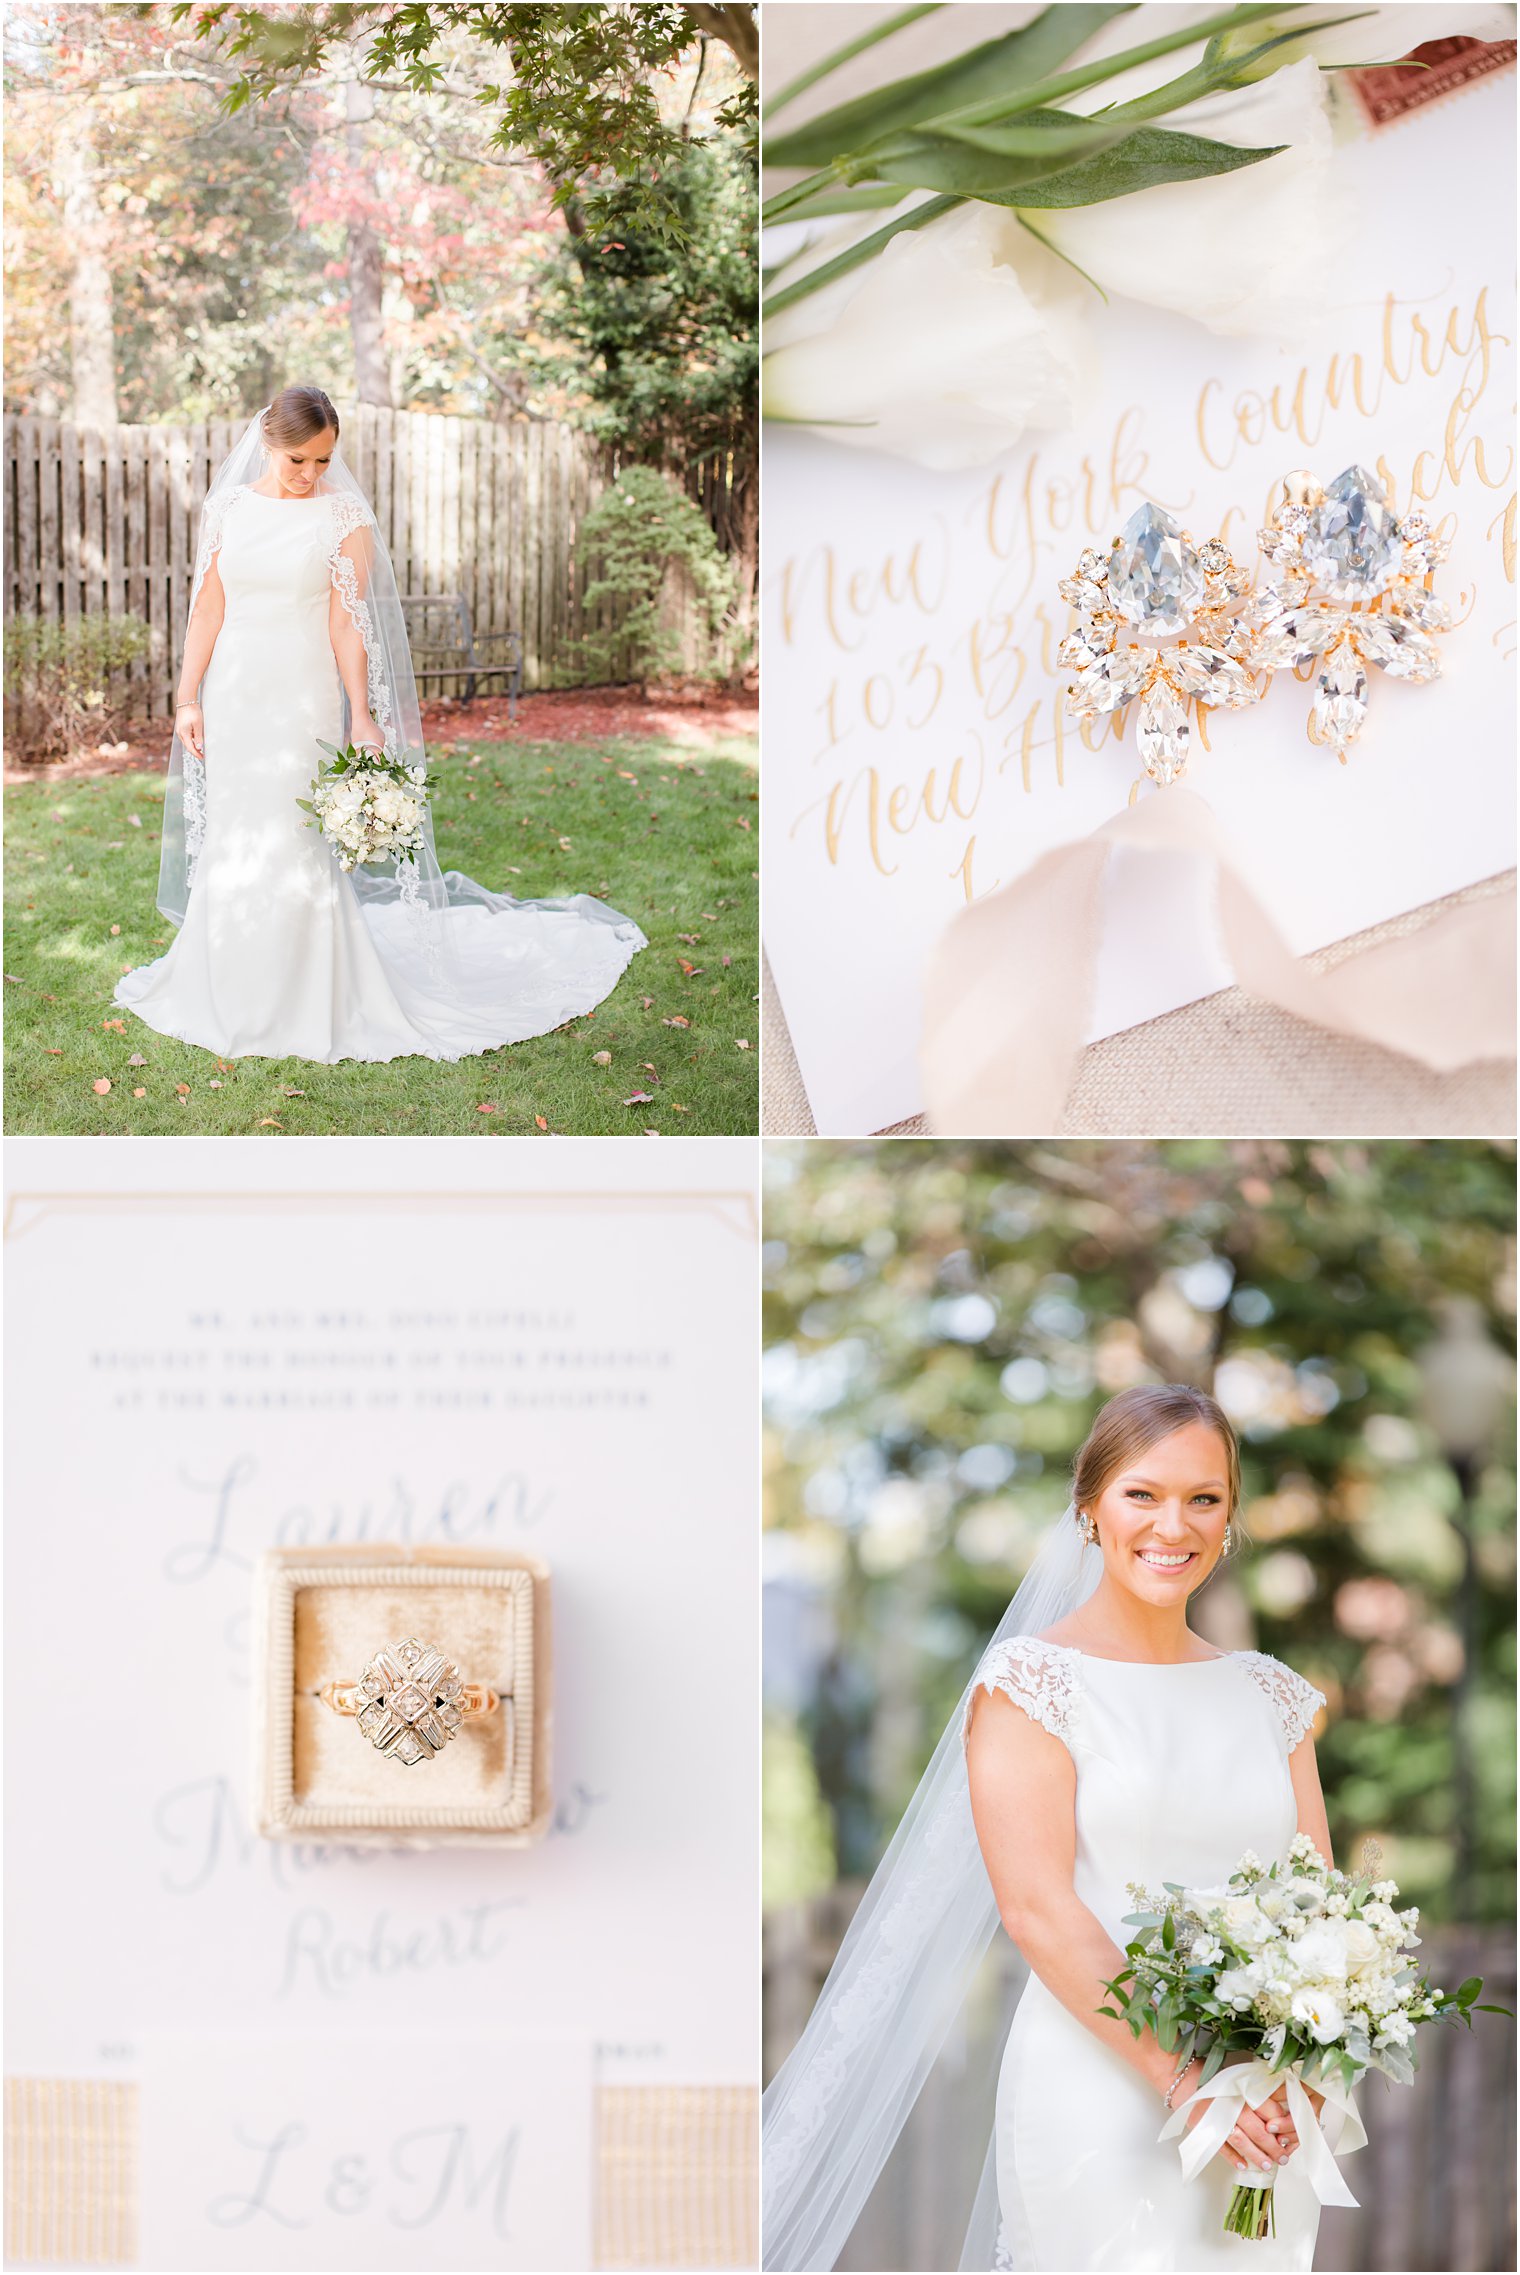 classic New York wedding day details photographed by Idalia Photography